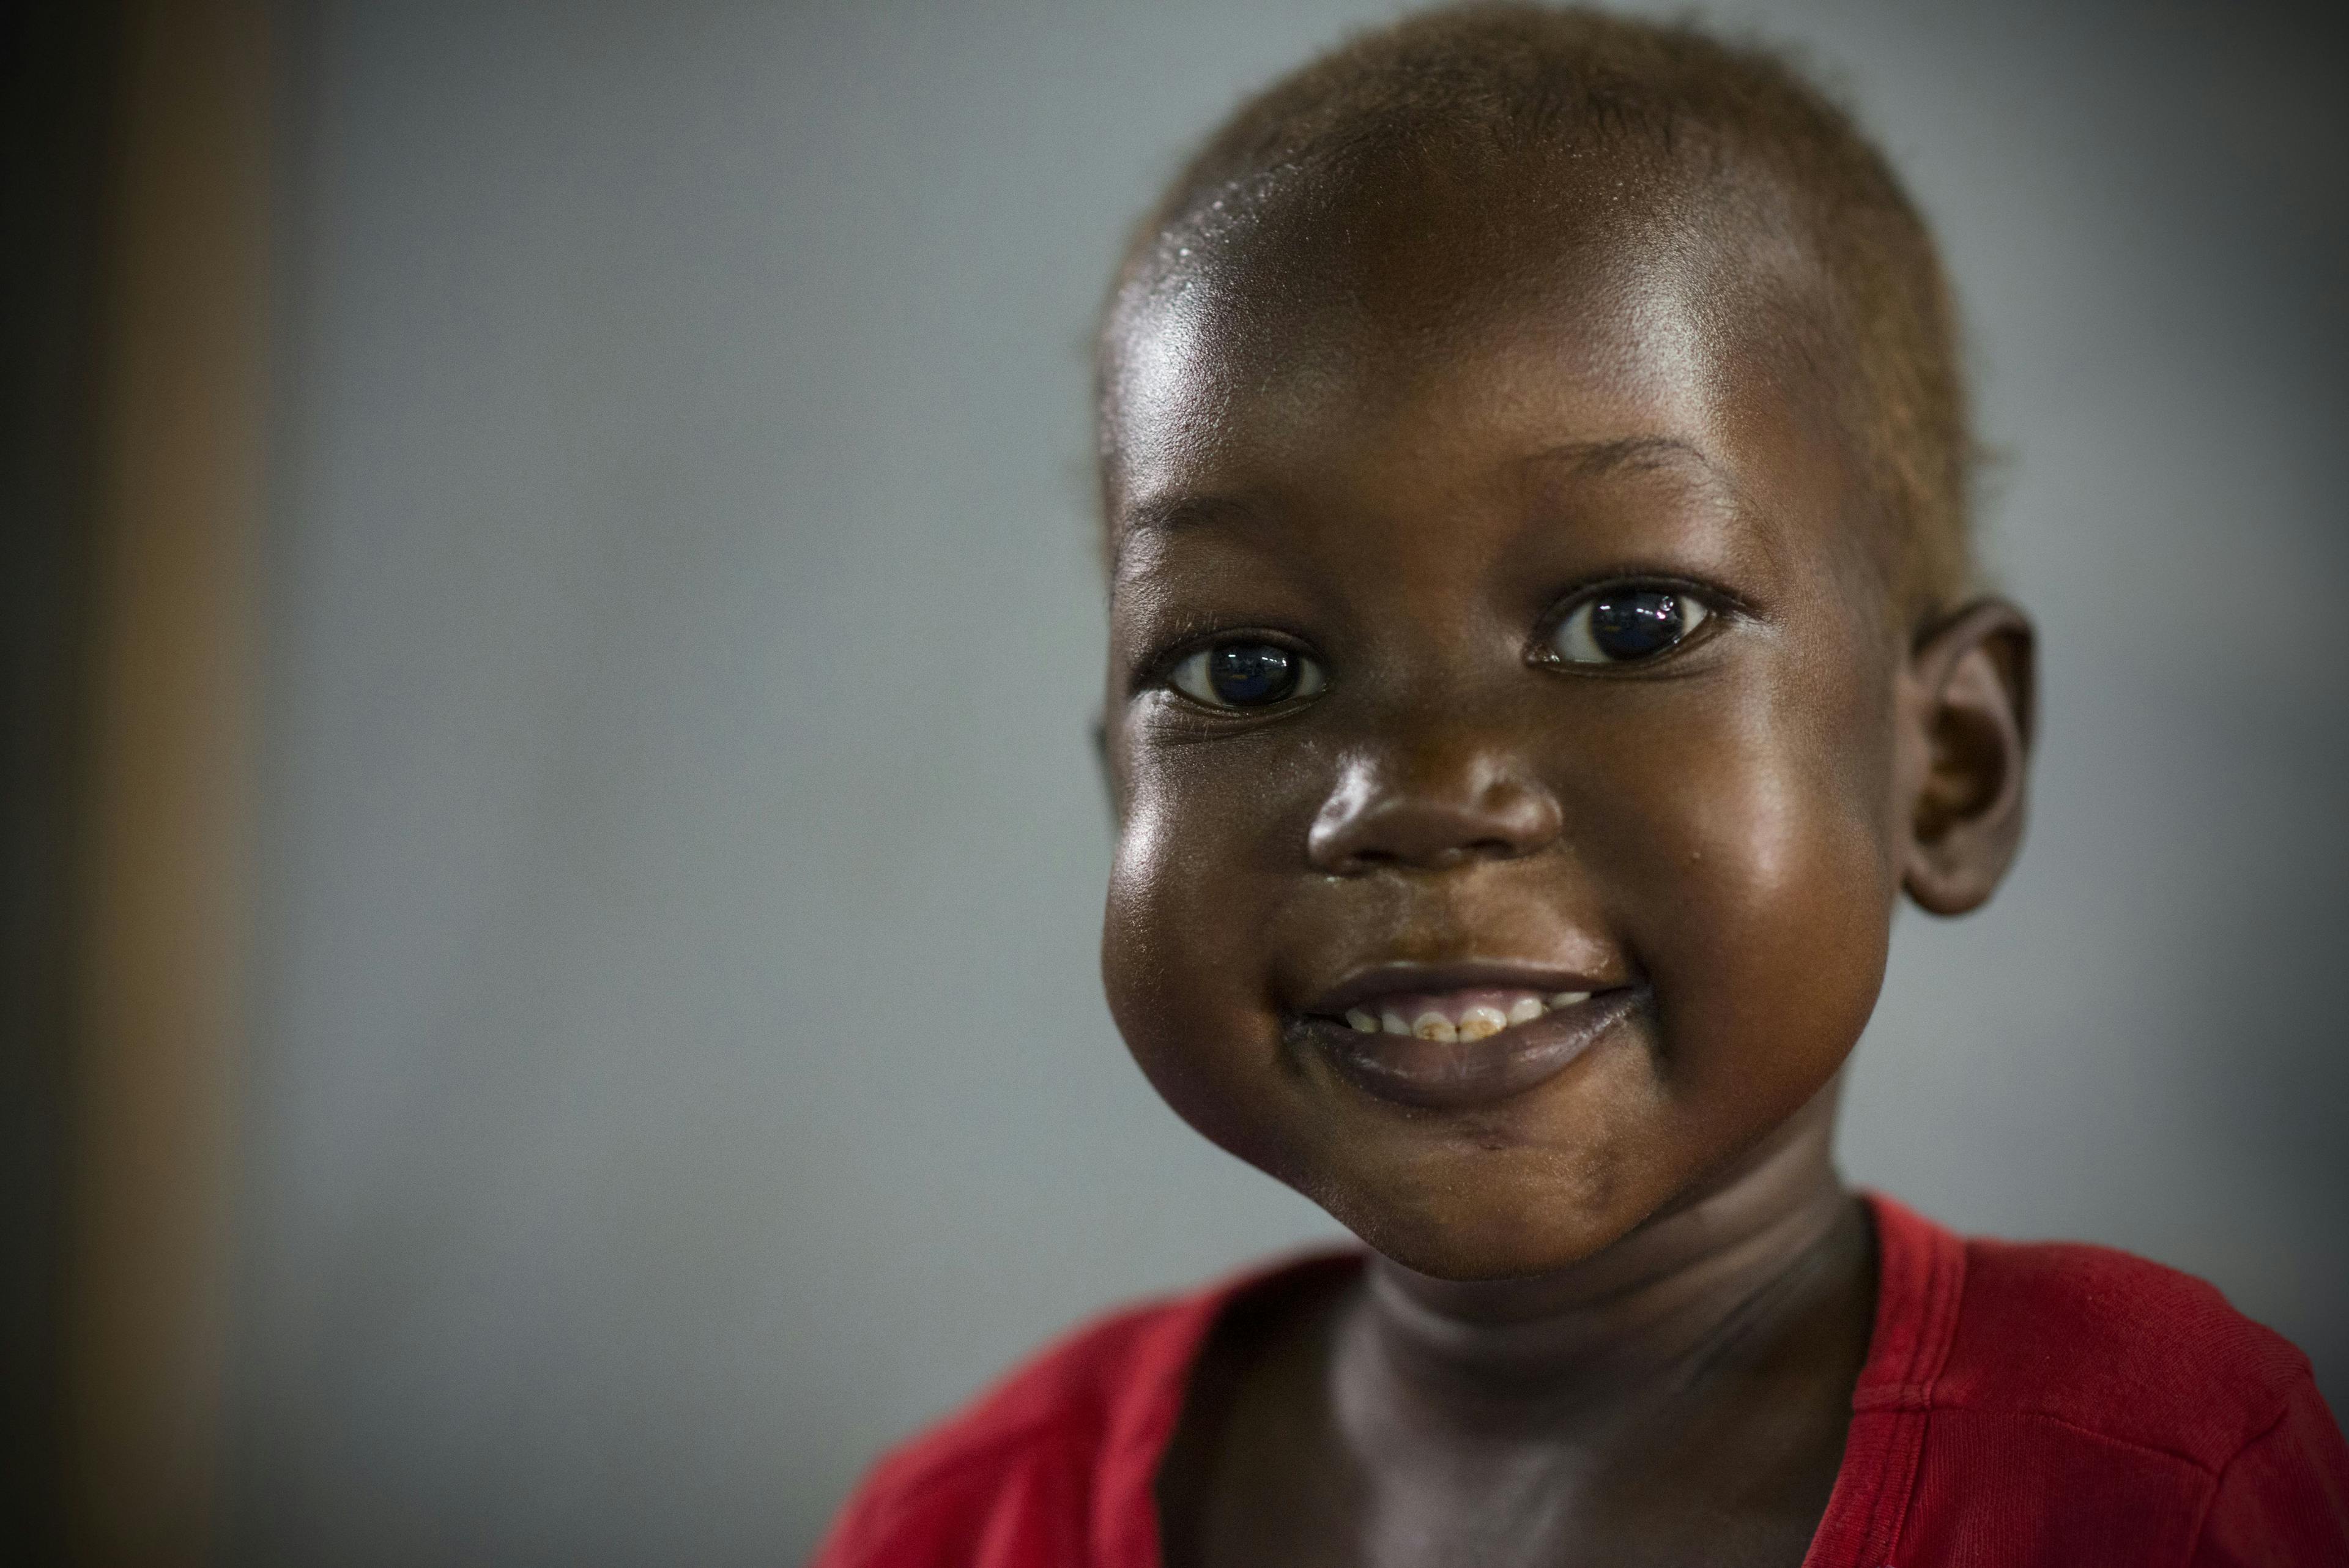 Nyajime Guet, 4, who is being treated for severe acute malnutrition